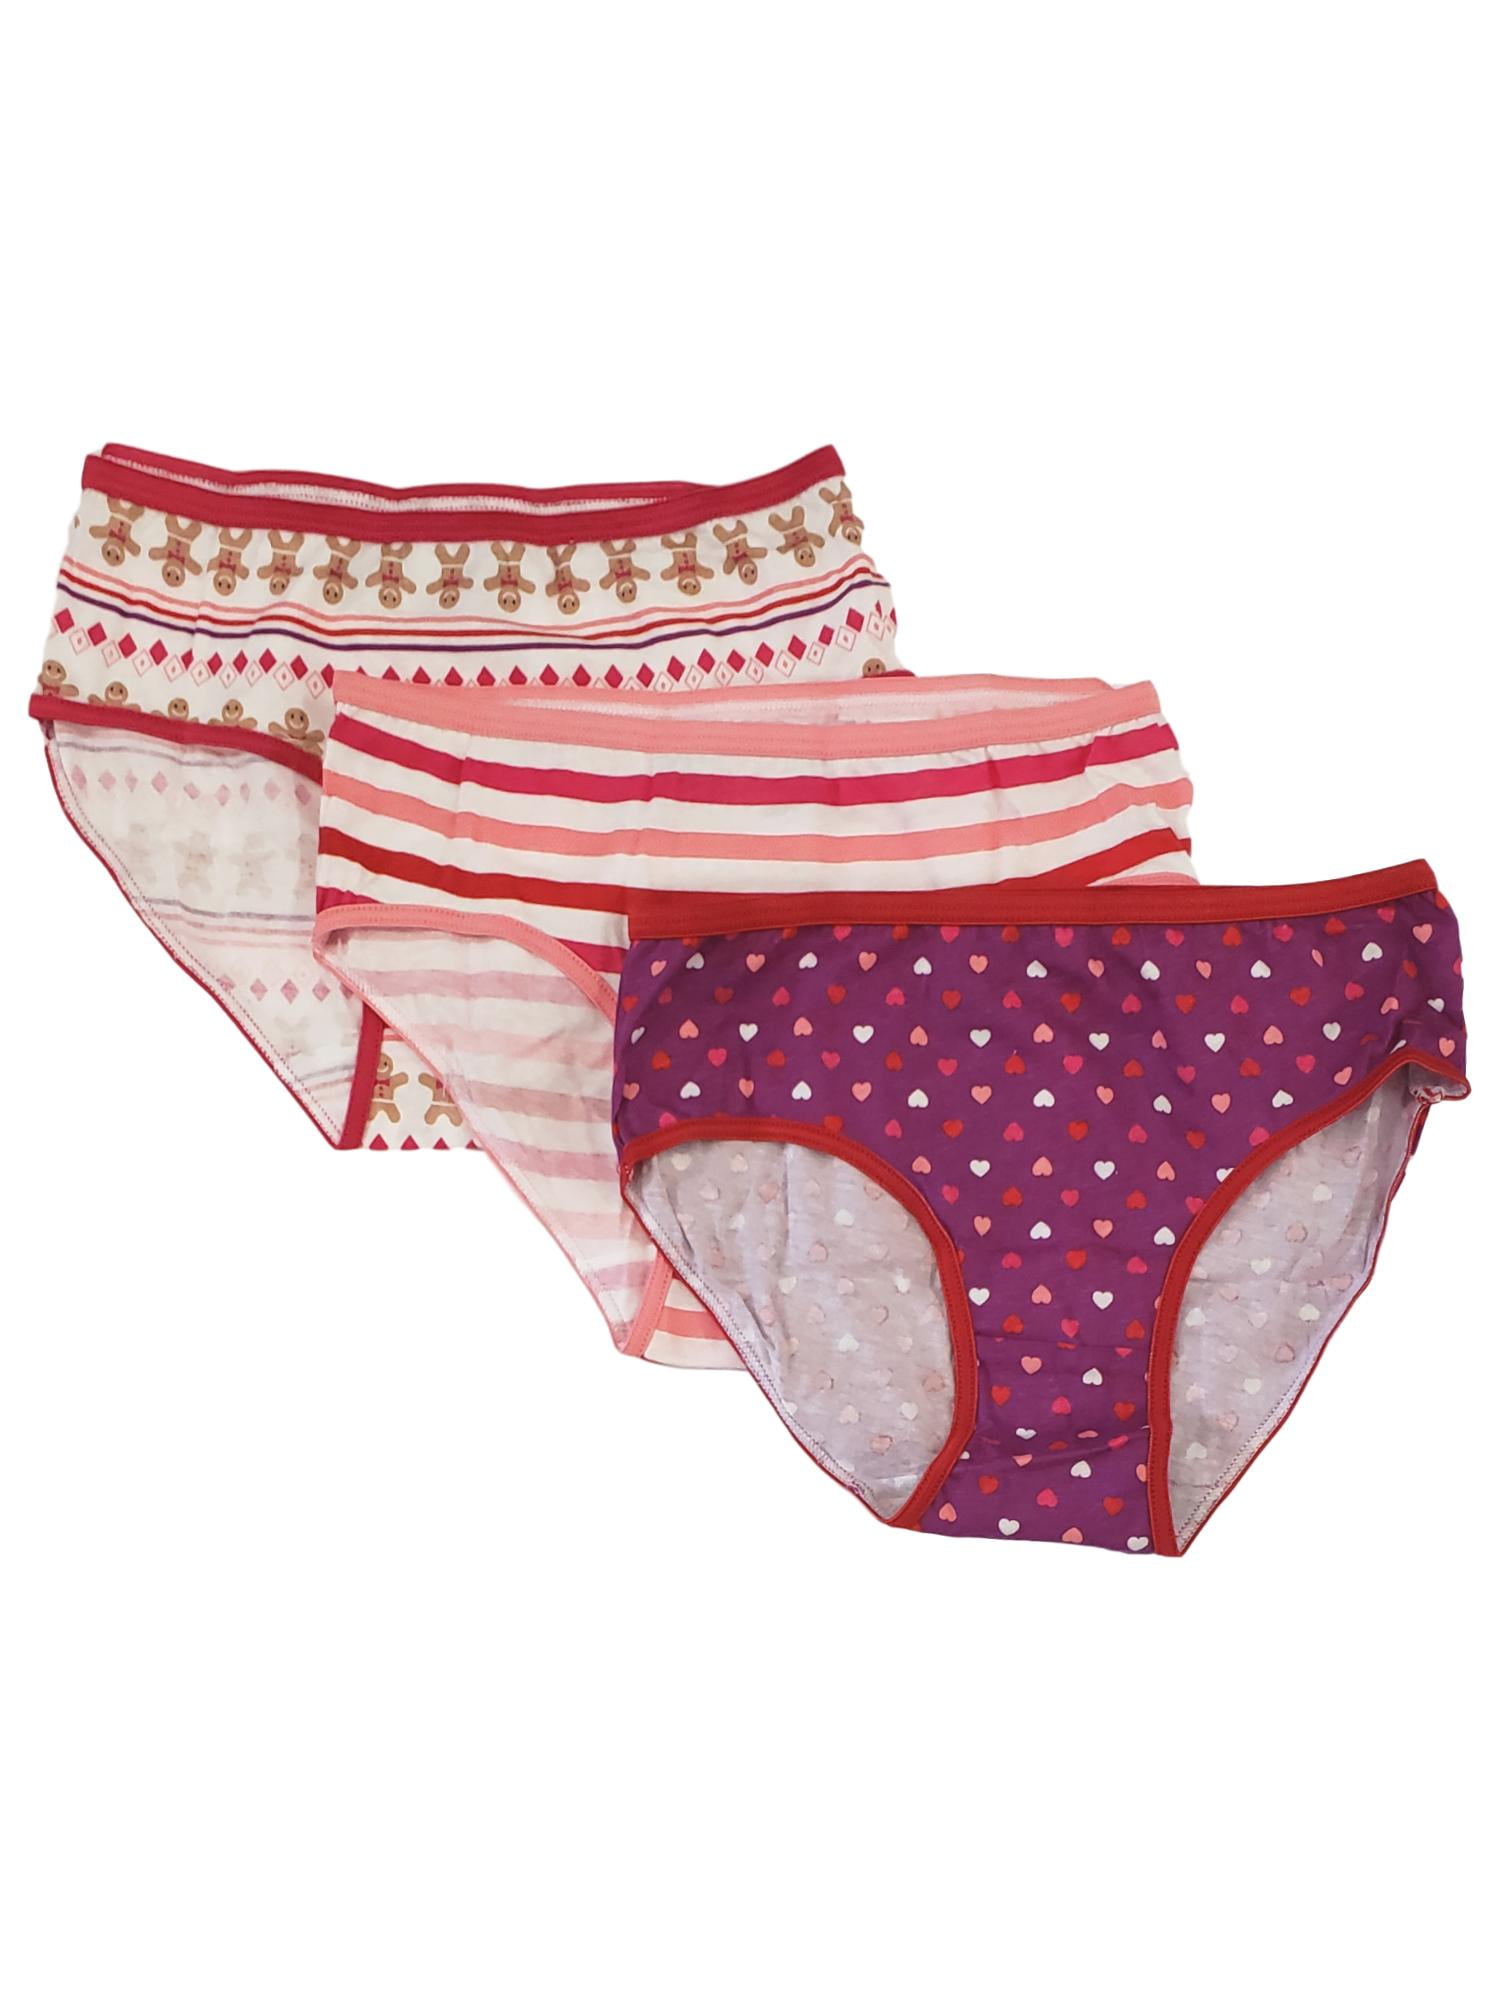 Cat & Jack, Accessories, Nwt Girls Size 6 Cat Jack Pack Panties Briefs  Colorful Panty Underwear